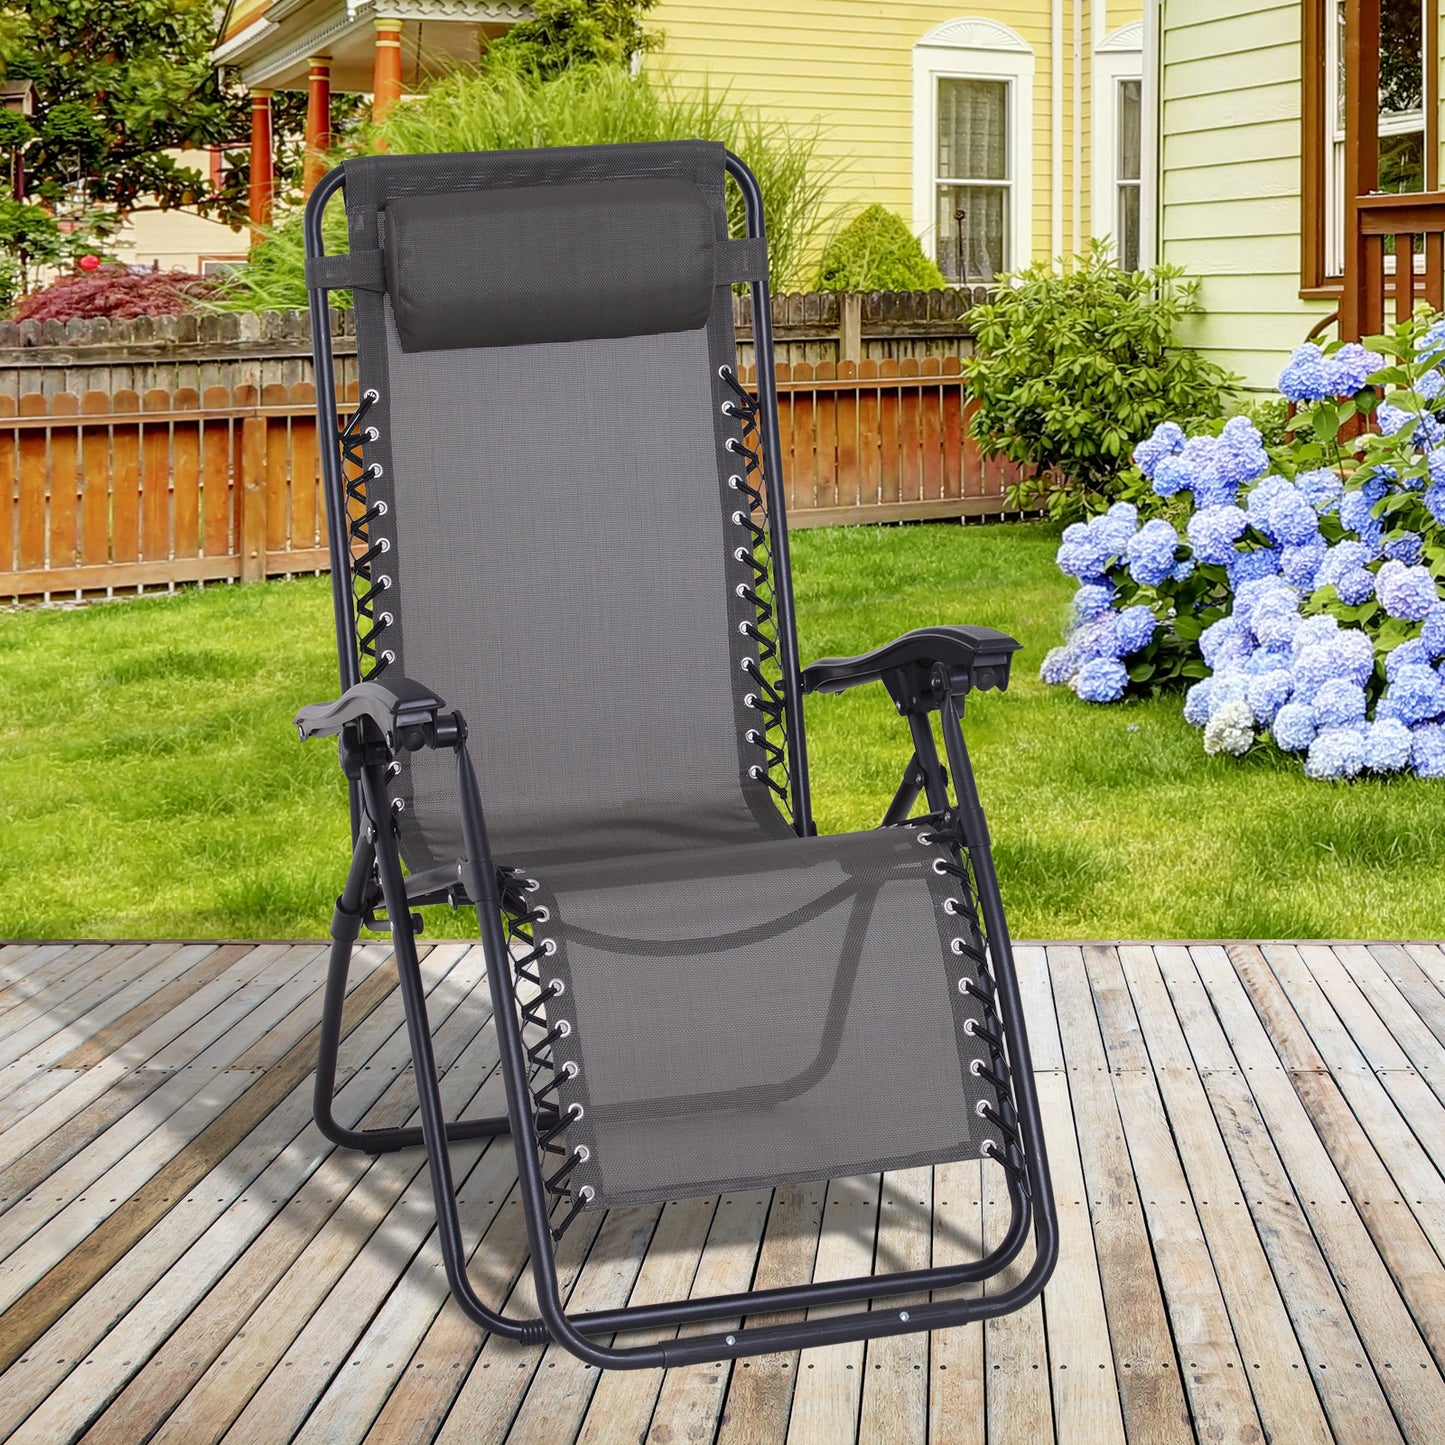 Outsunny Zero Gravity Chair Outdoor Folding & Reclining Sun Lounger with Head Pillow for Patio Decking Gardens Camping, Grey w/ Camping